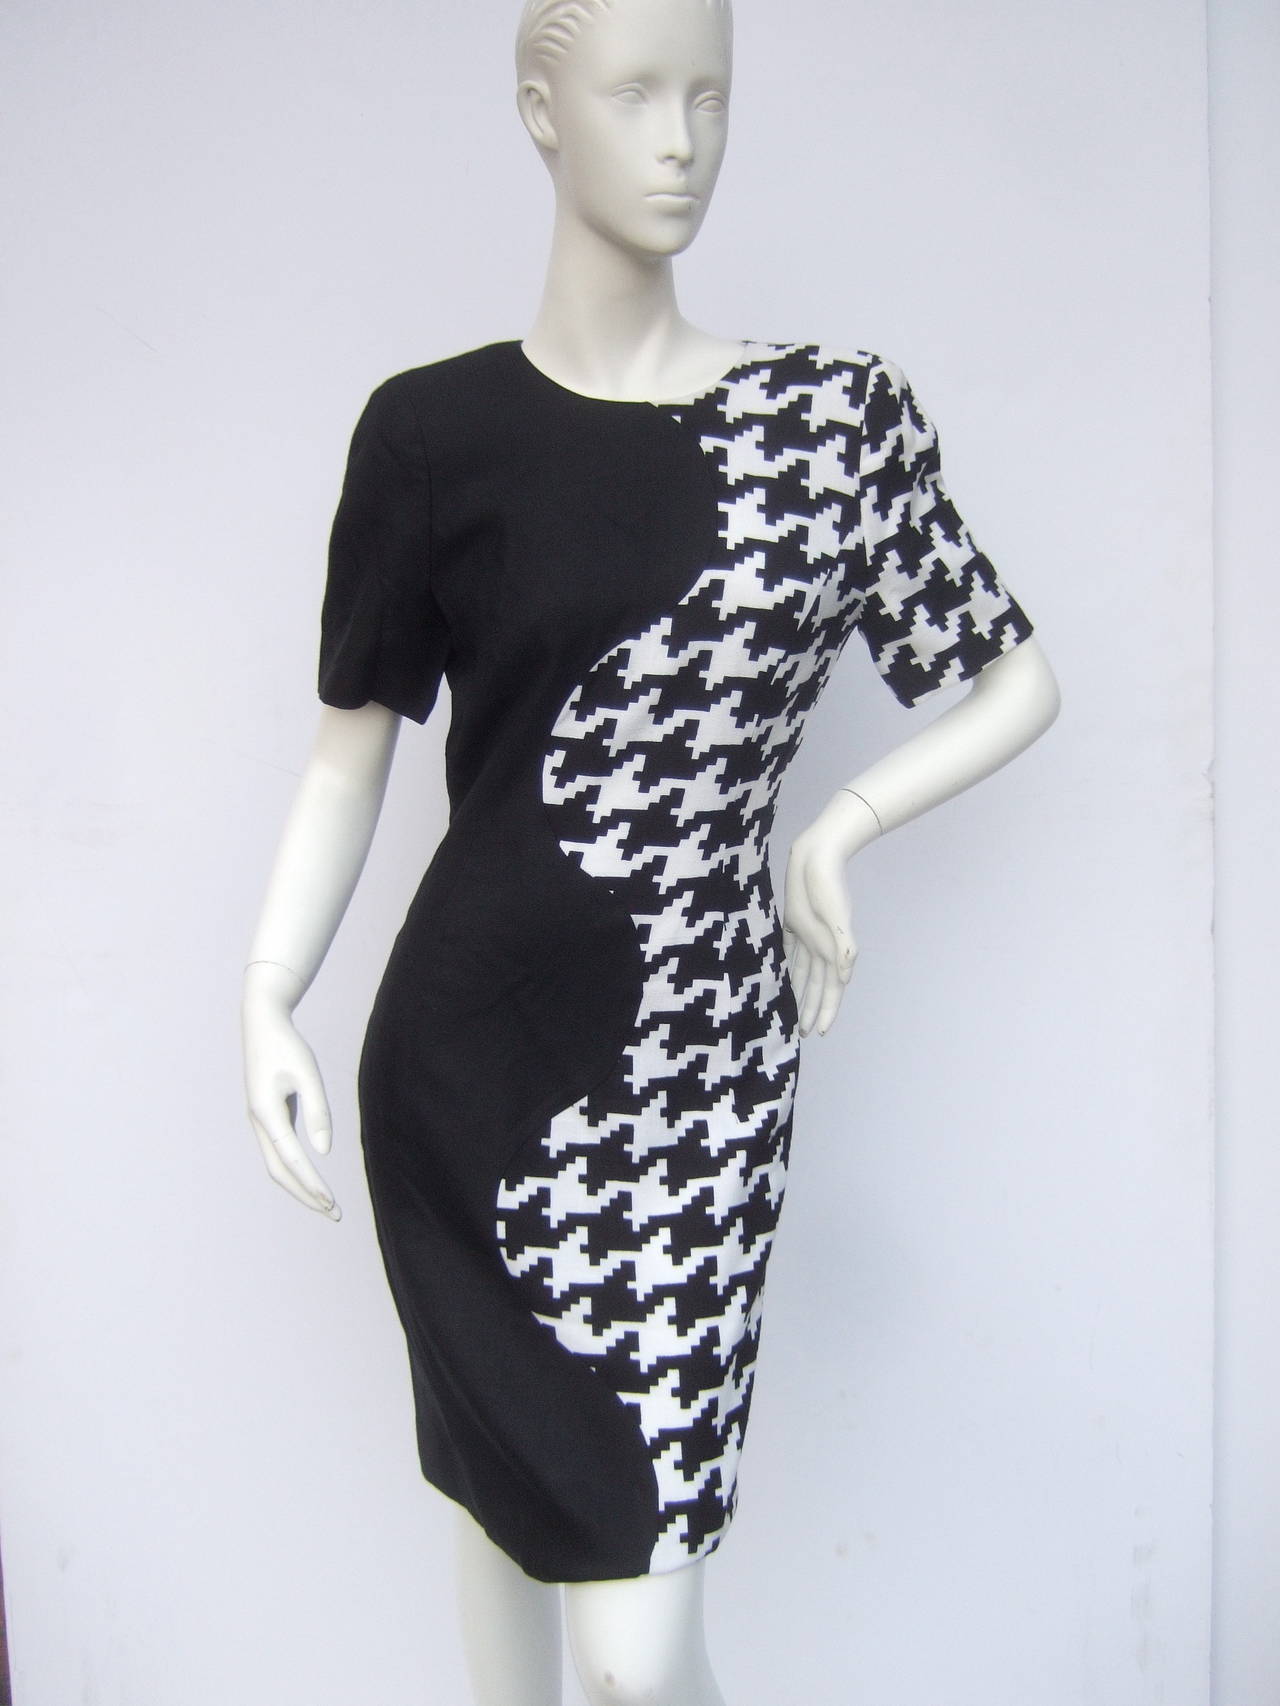 Carolina Herrera Mod color block linen blend sheath dress US Size 6 c 1990
The stylish dress is designed with a bold hounds tooth pattern 
combined with a solid black panel. The center of the dress has
a sinuous curved seam that runs down the